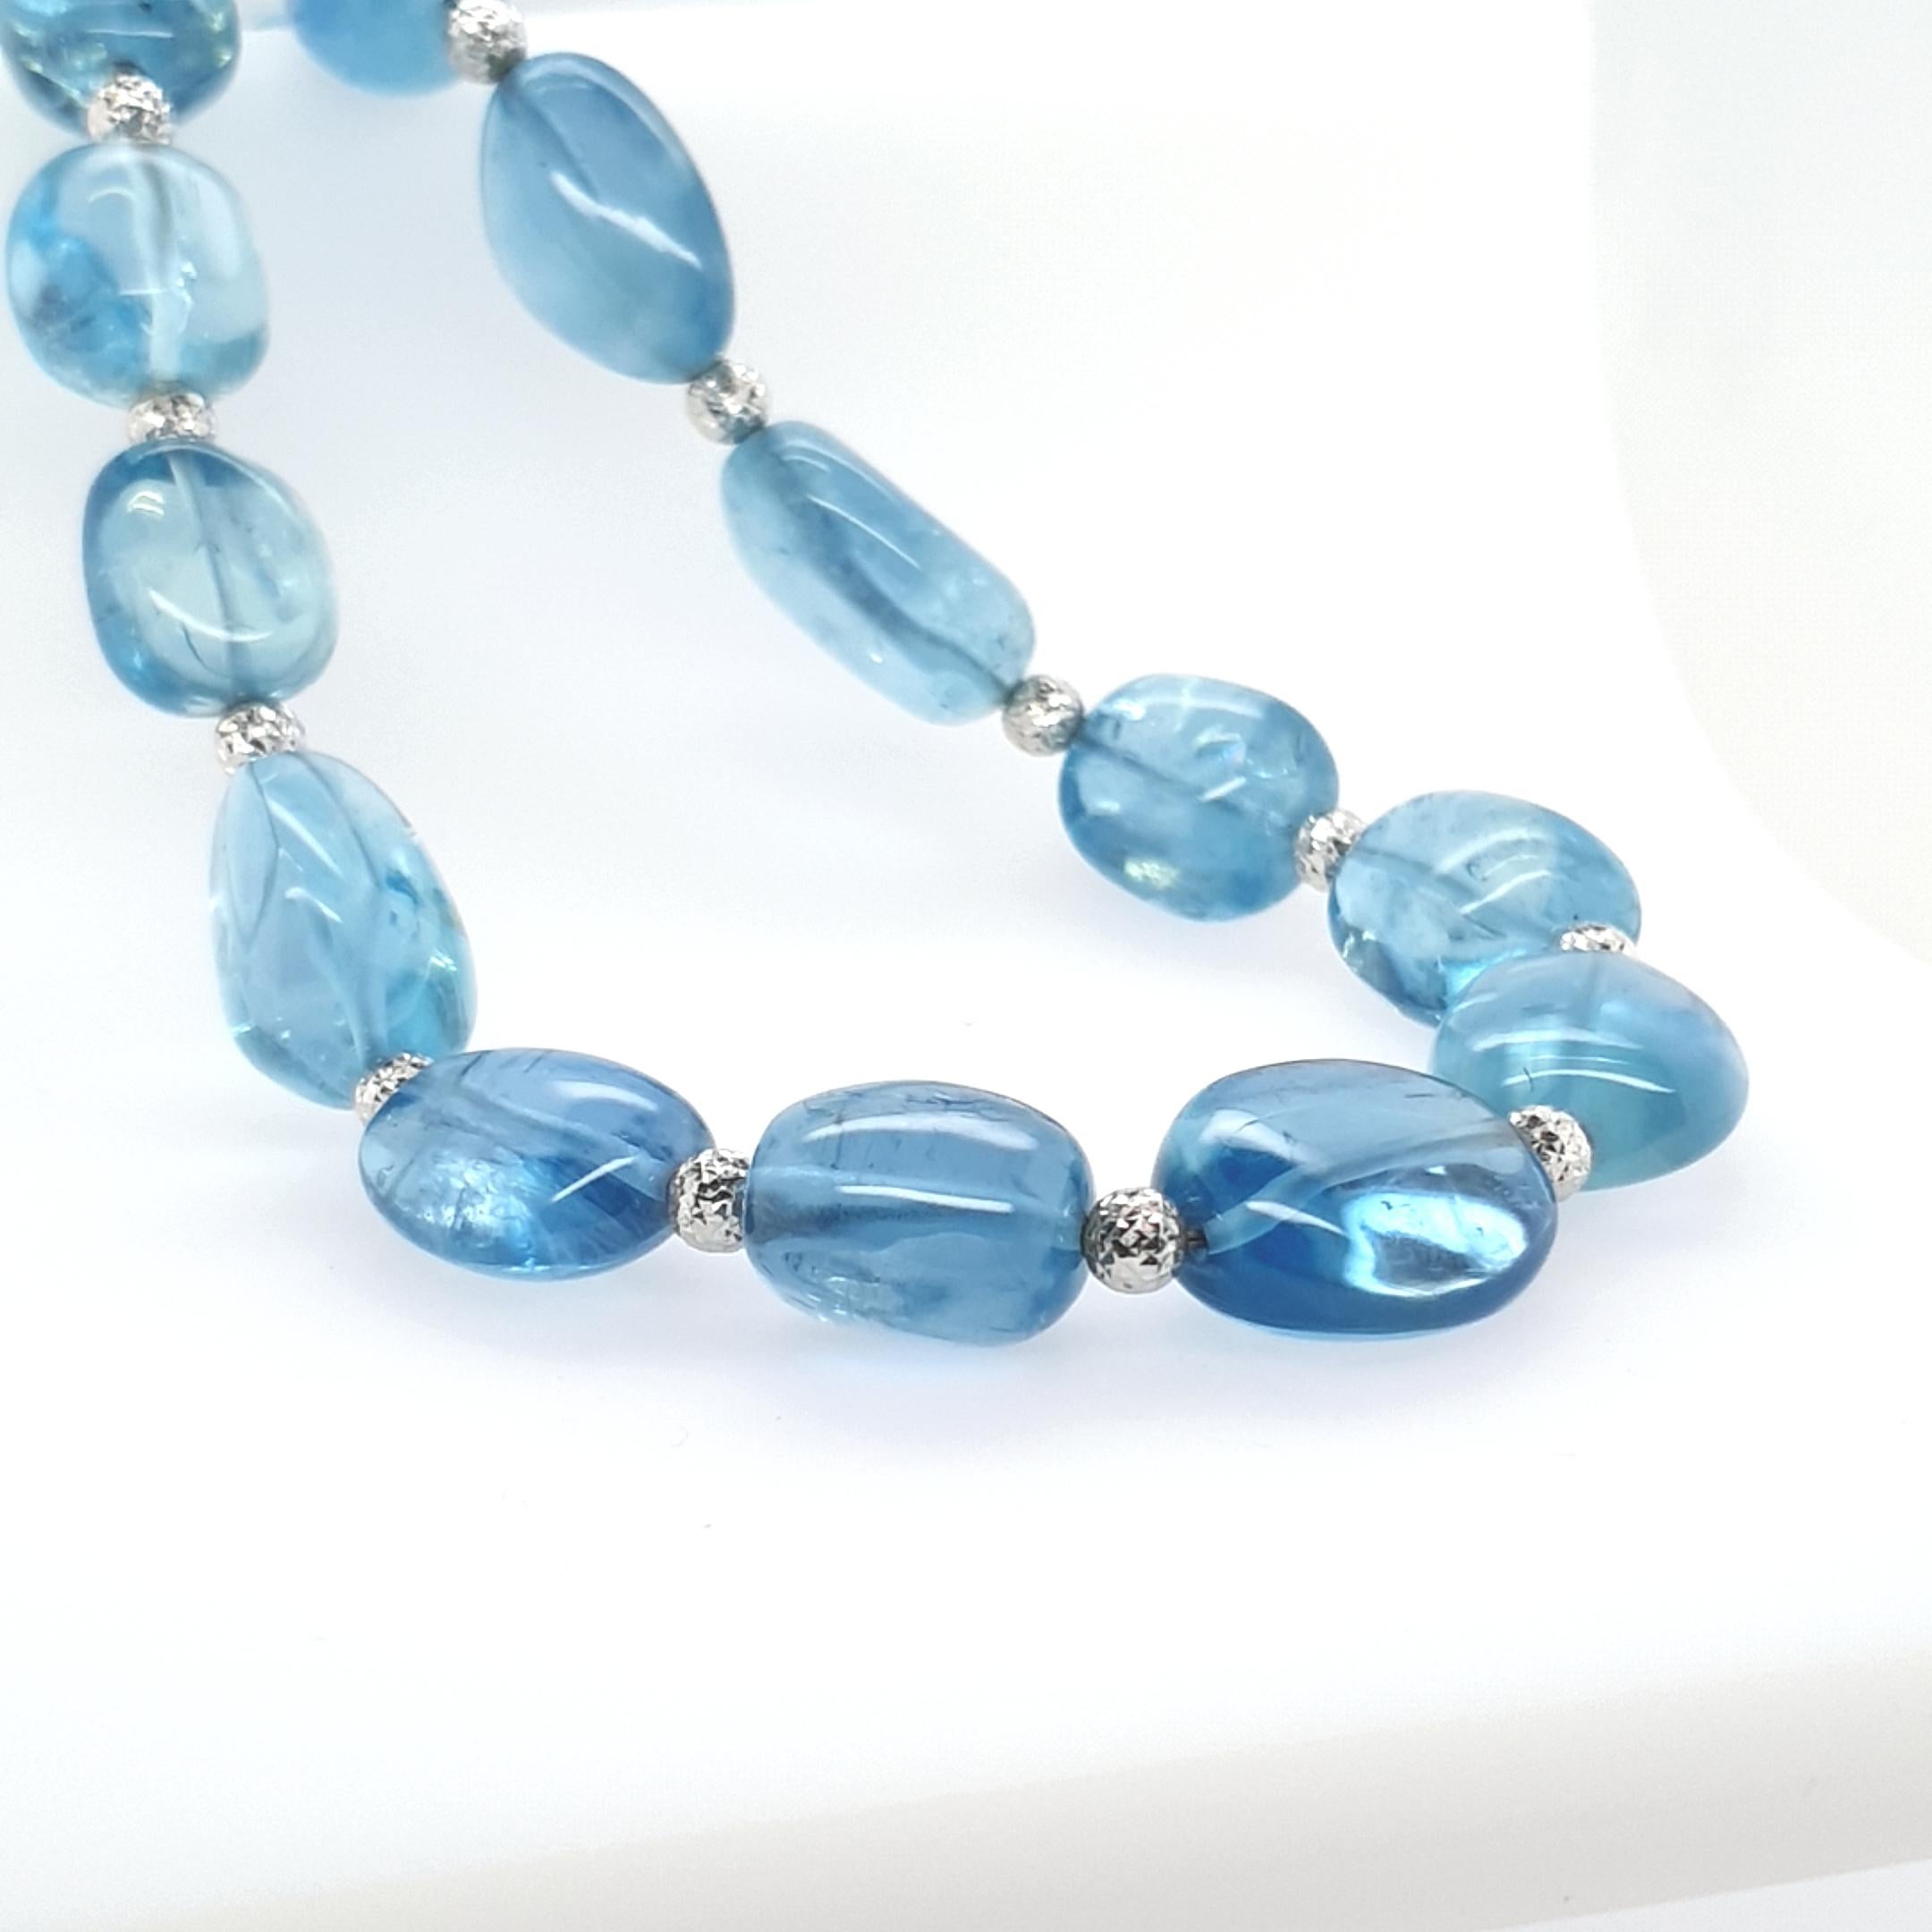 This exceptional Sky Blue Aquamarine Baroque Beaded Necklace with 18 Carat White Gold beads and clasp is totally handmade on German quality standard. The screw clasp is easy to handle and very secure.
Timeless and classic design combined with very